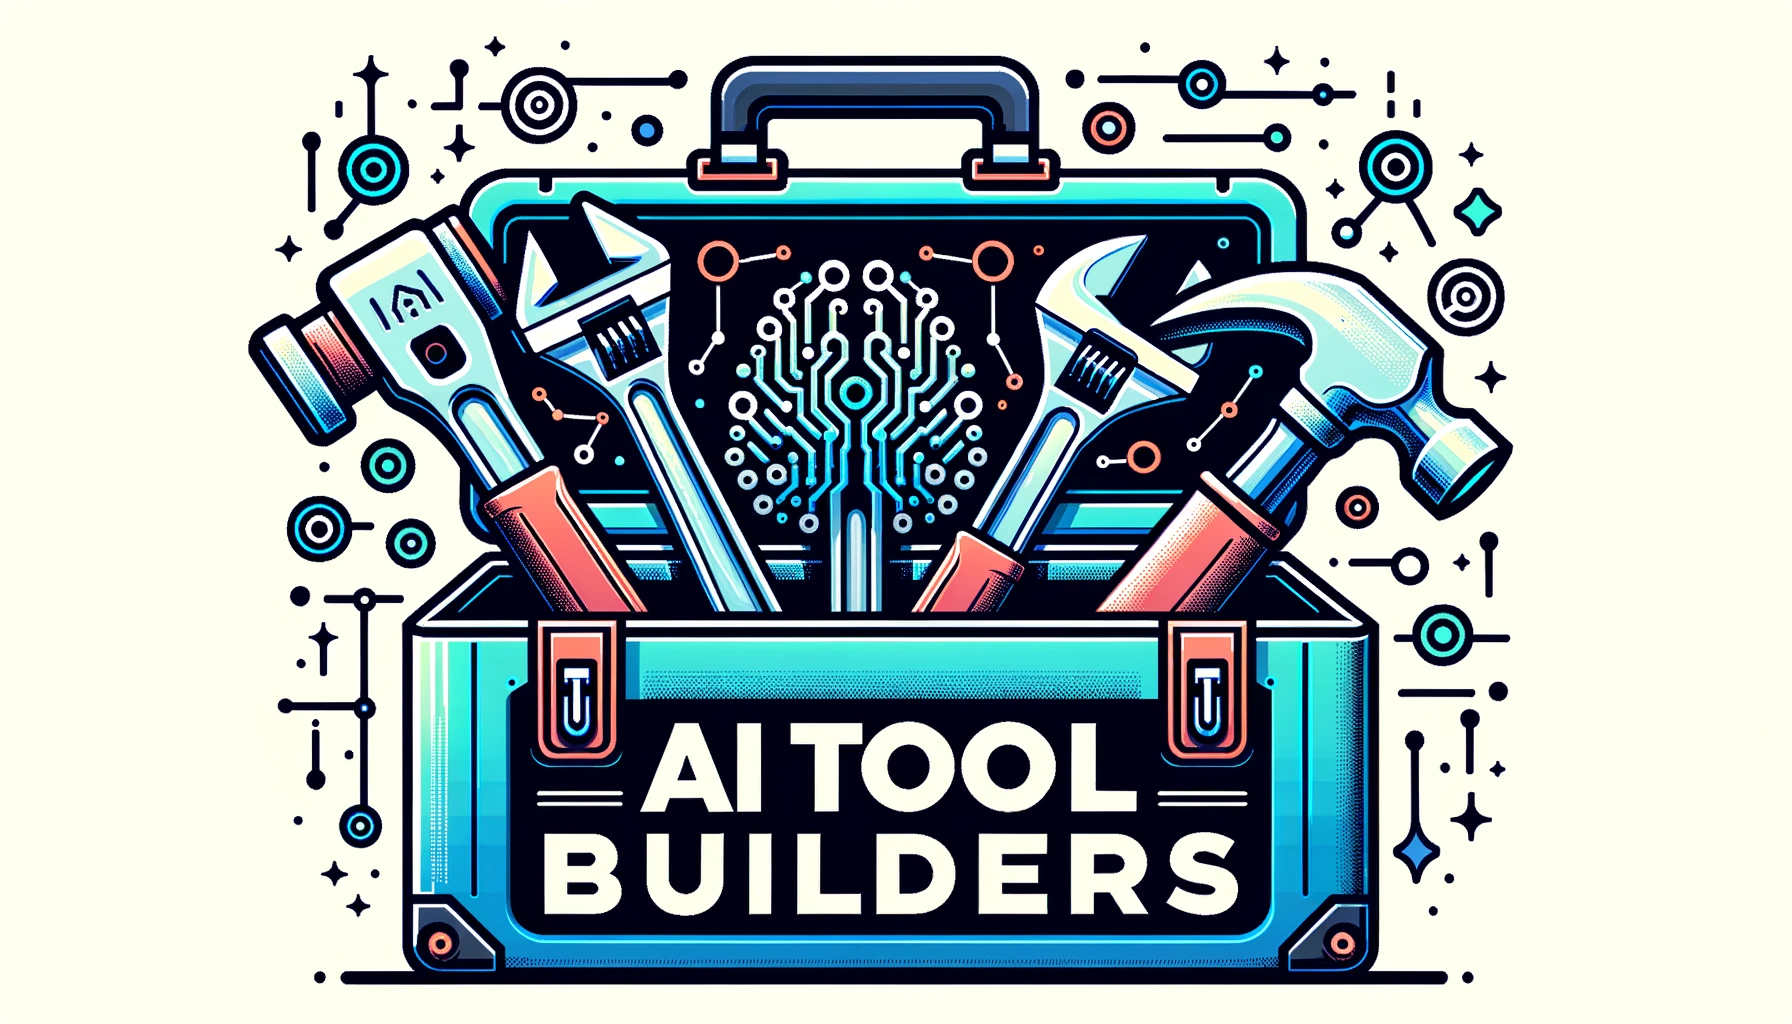 Introduction to AI Tool Builders